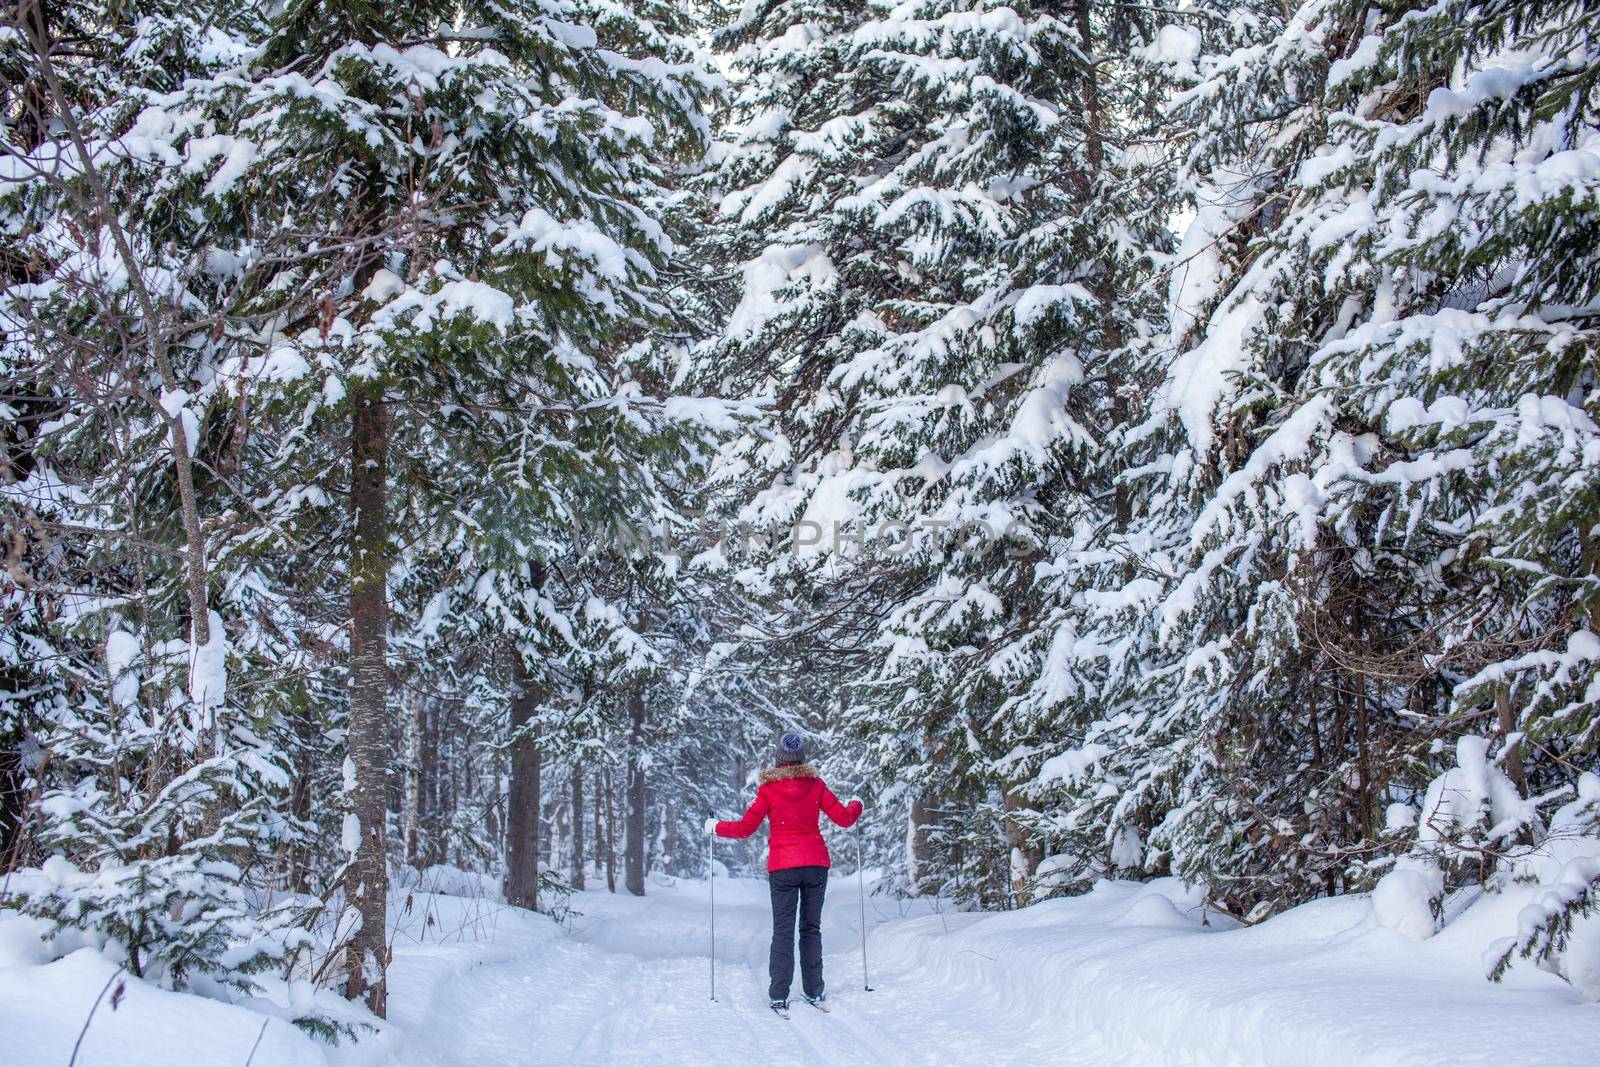 A girl in a red jacket goes skiing in a snowy forest in winter.  by AnatoliiFoto